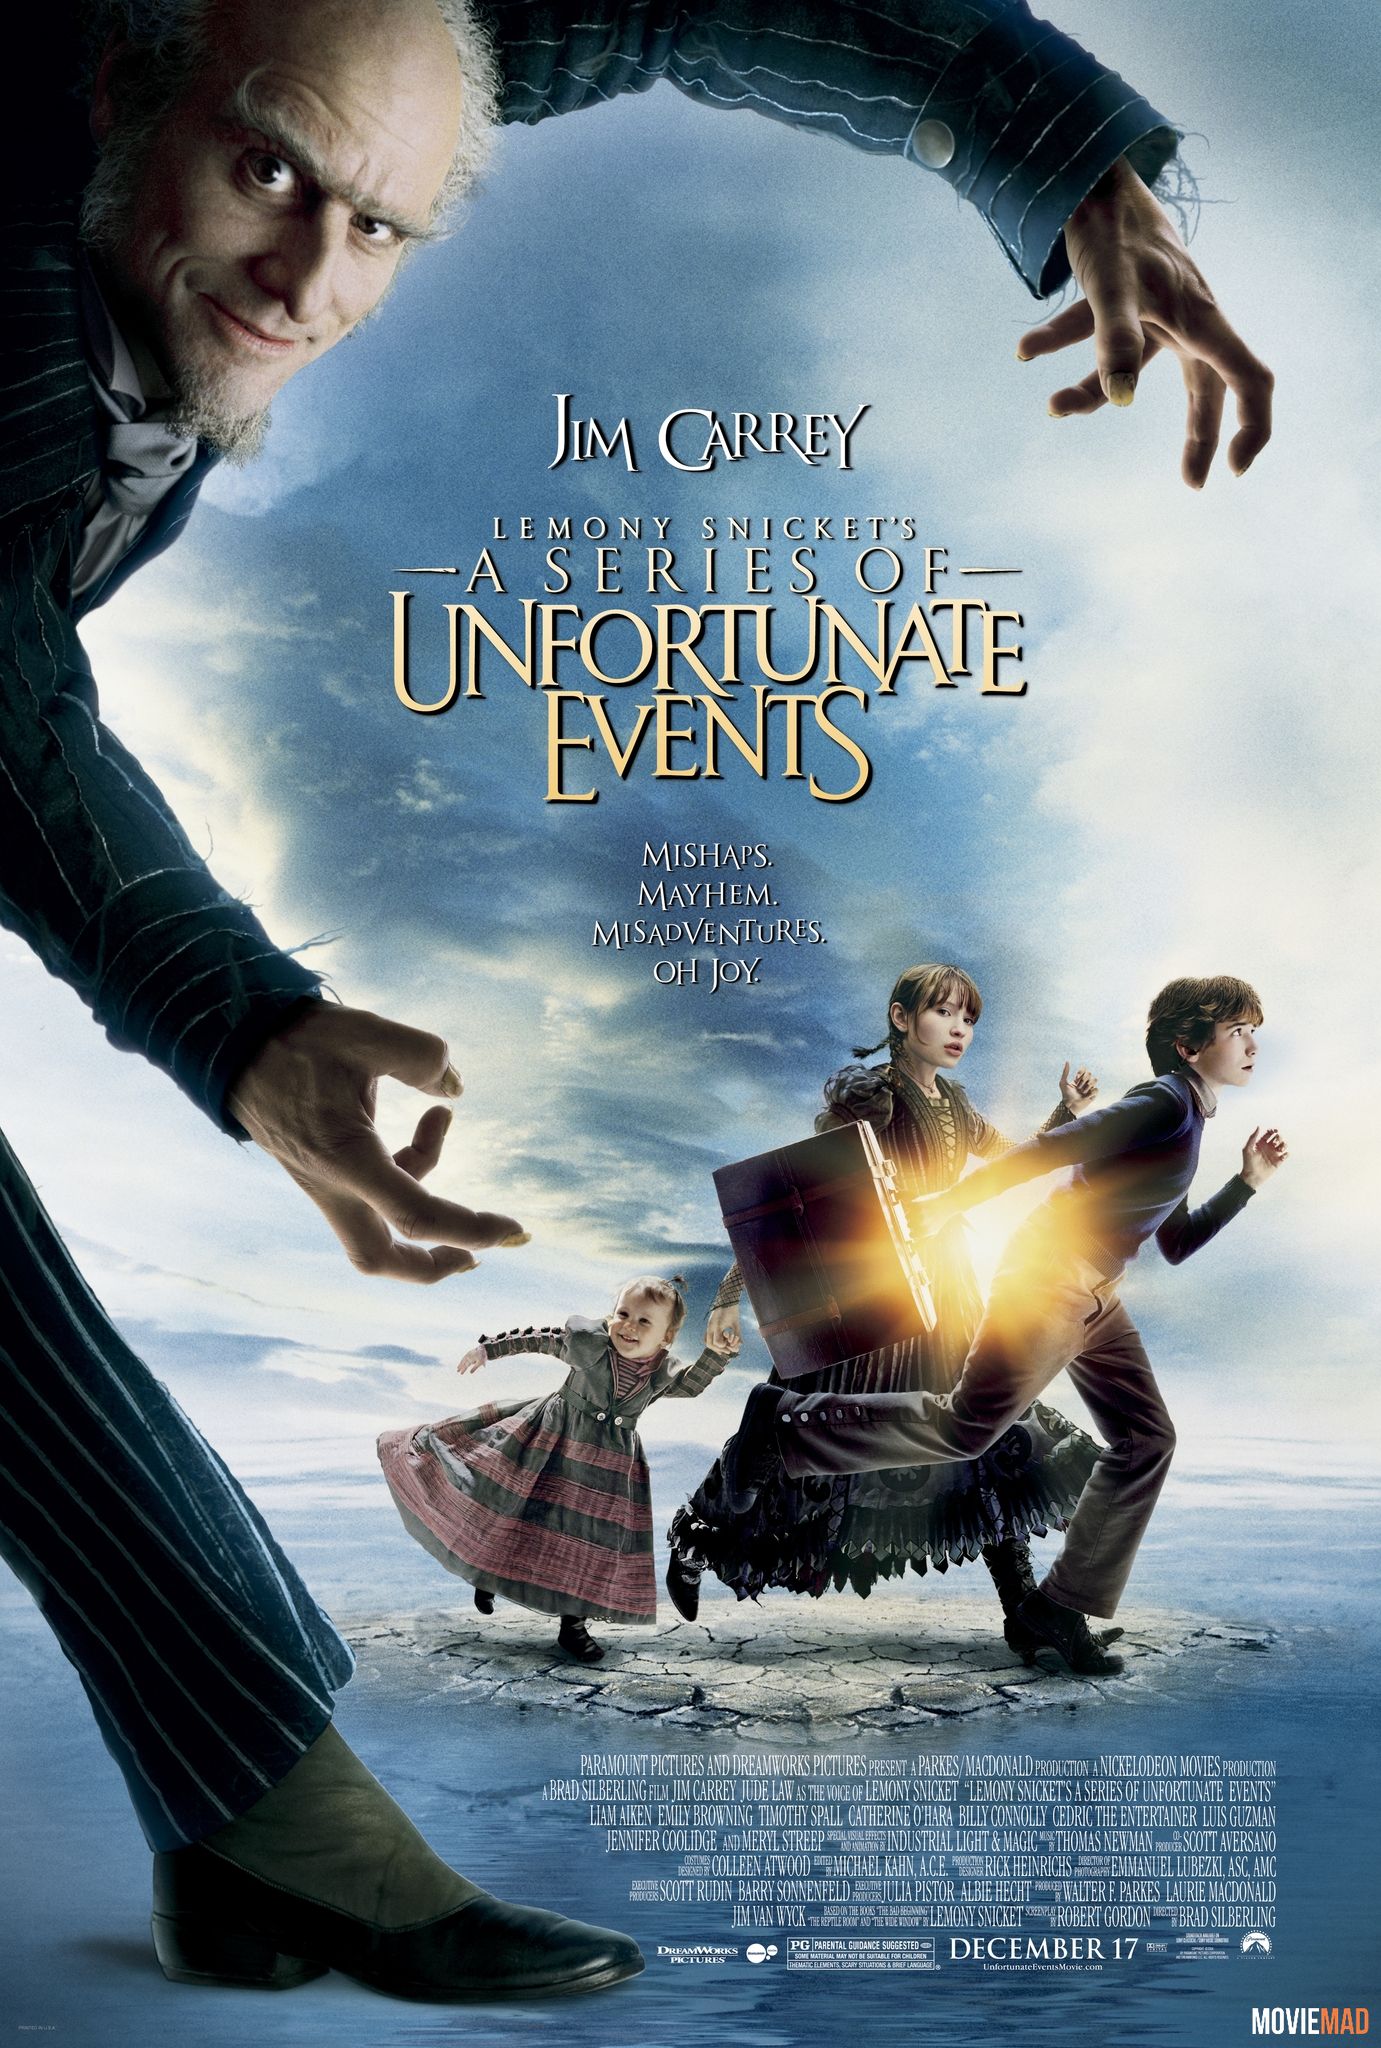 Lemony Snickets A Series of Unfortunate Events 2004 Hindi Dubbed BluRay Full Movie 720p 480p